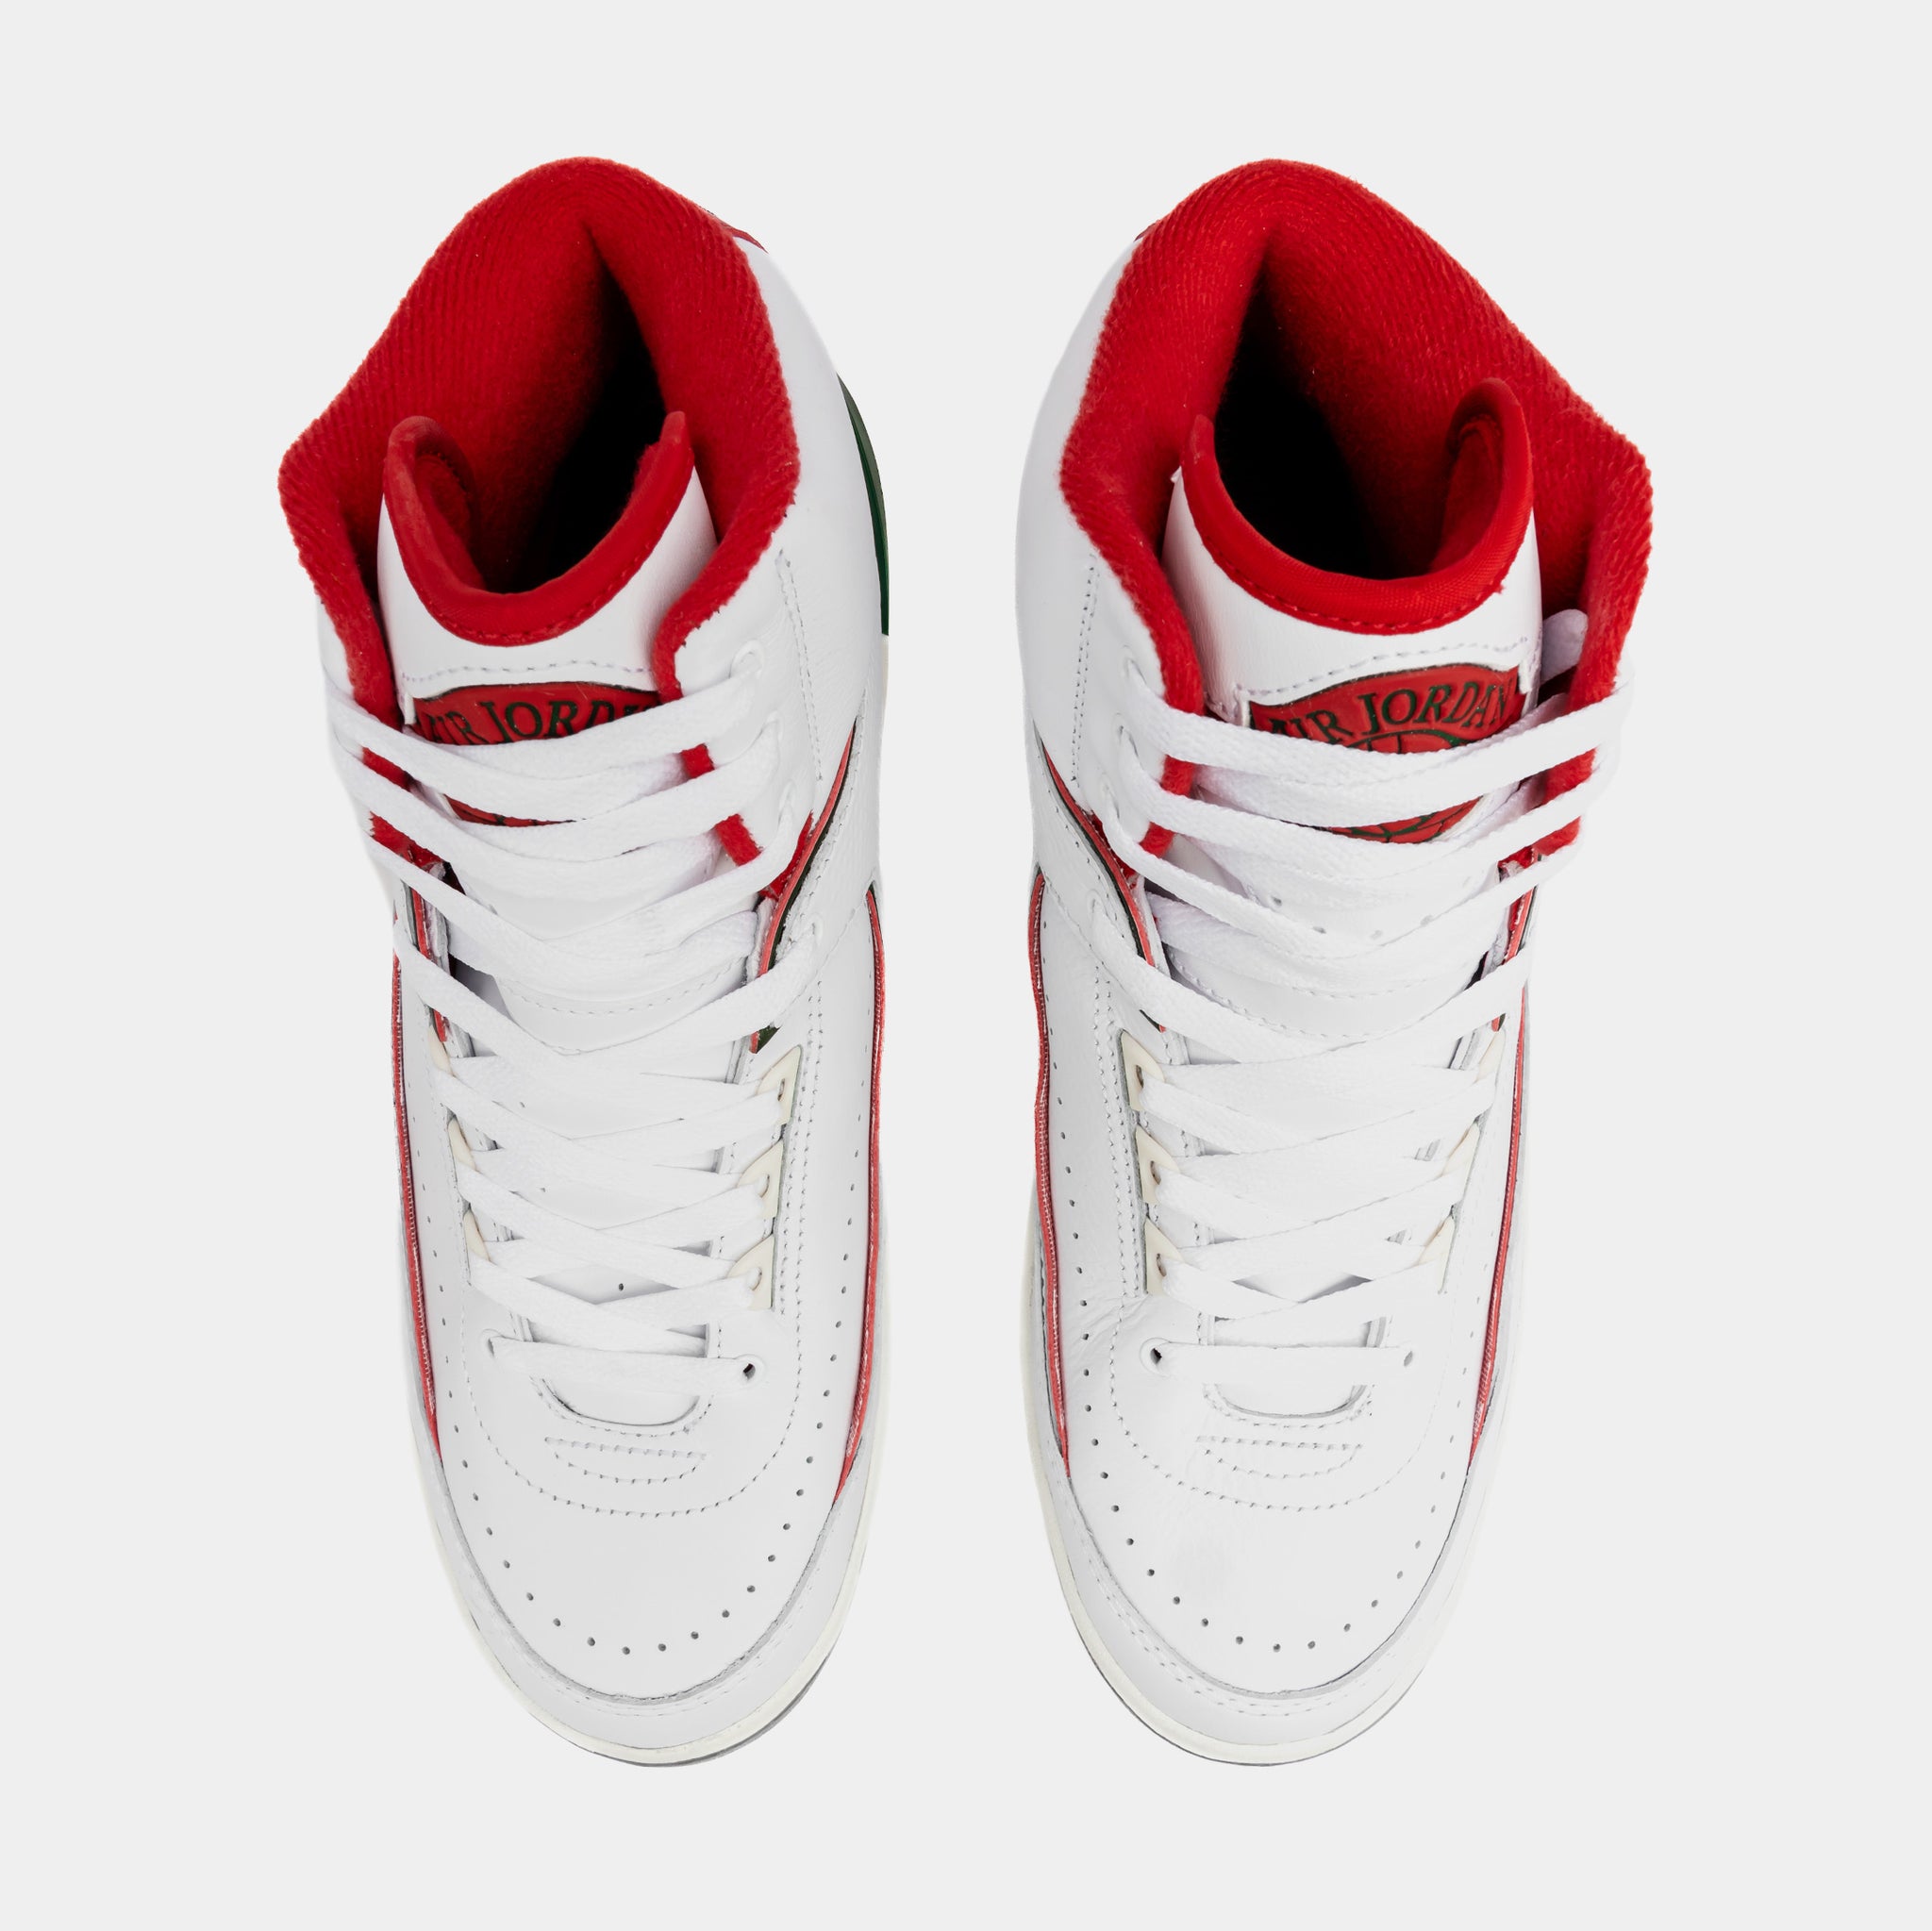 Air Jordan 2 Retro Italy Mens Lifestyle Shoes (White/Fire Red) Free Shipping